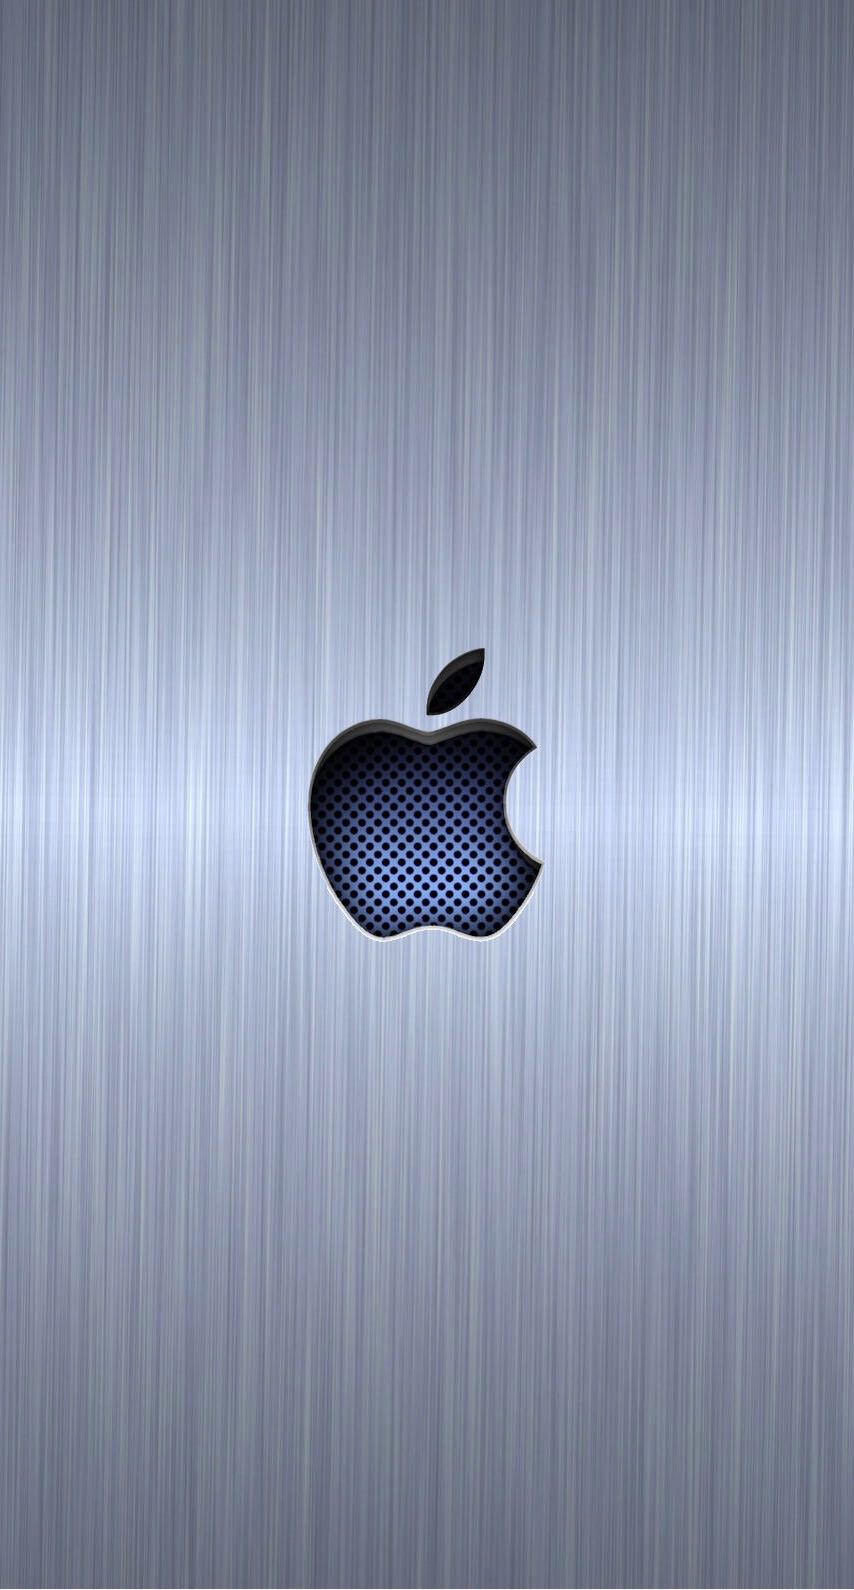 Silver Apple Cool Wallpaper Sc Iphone8